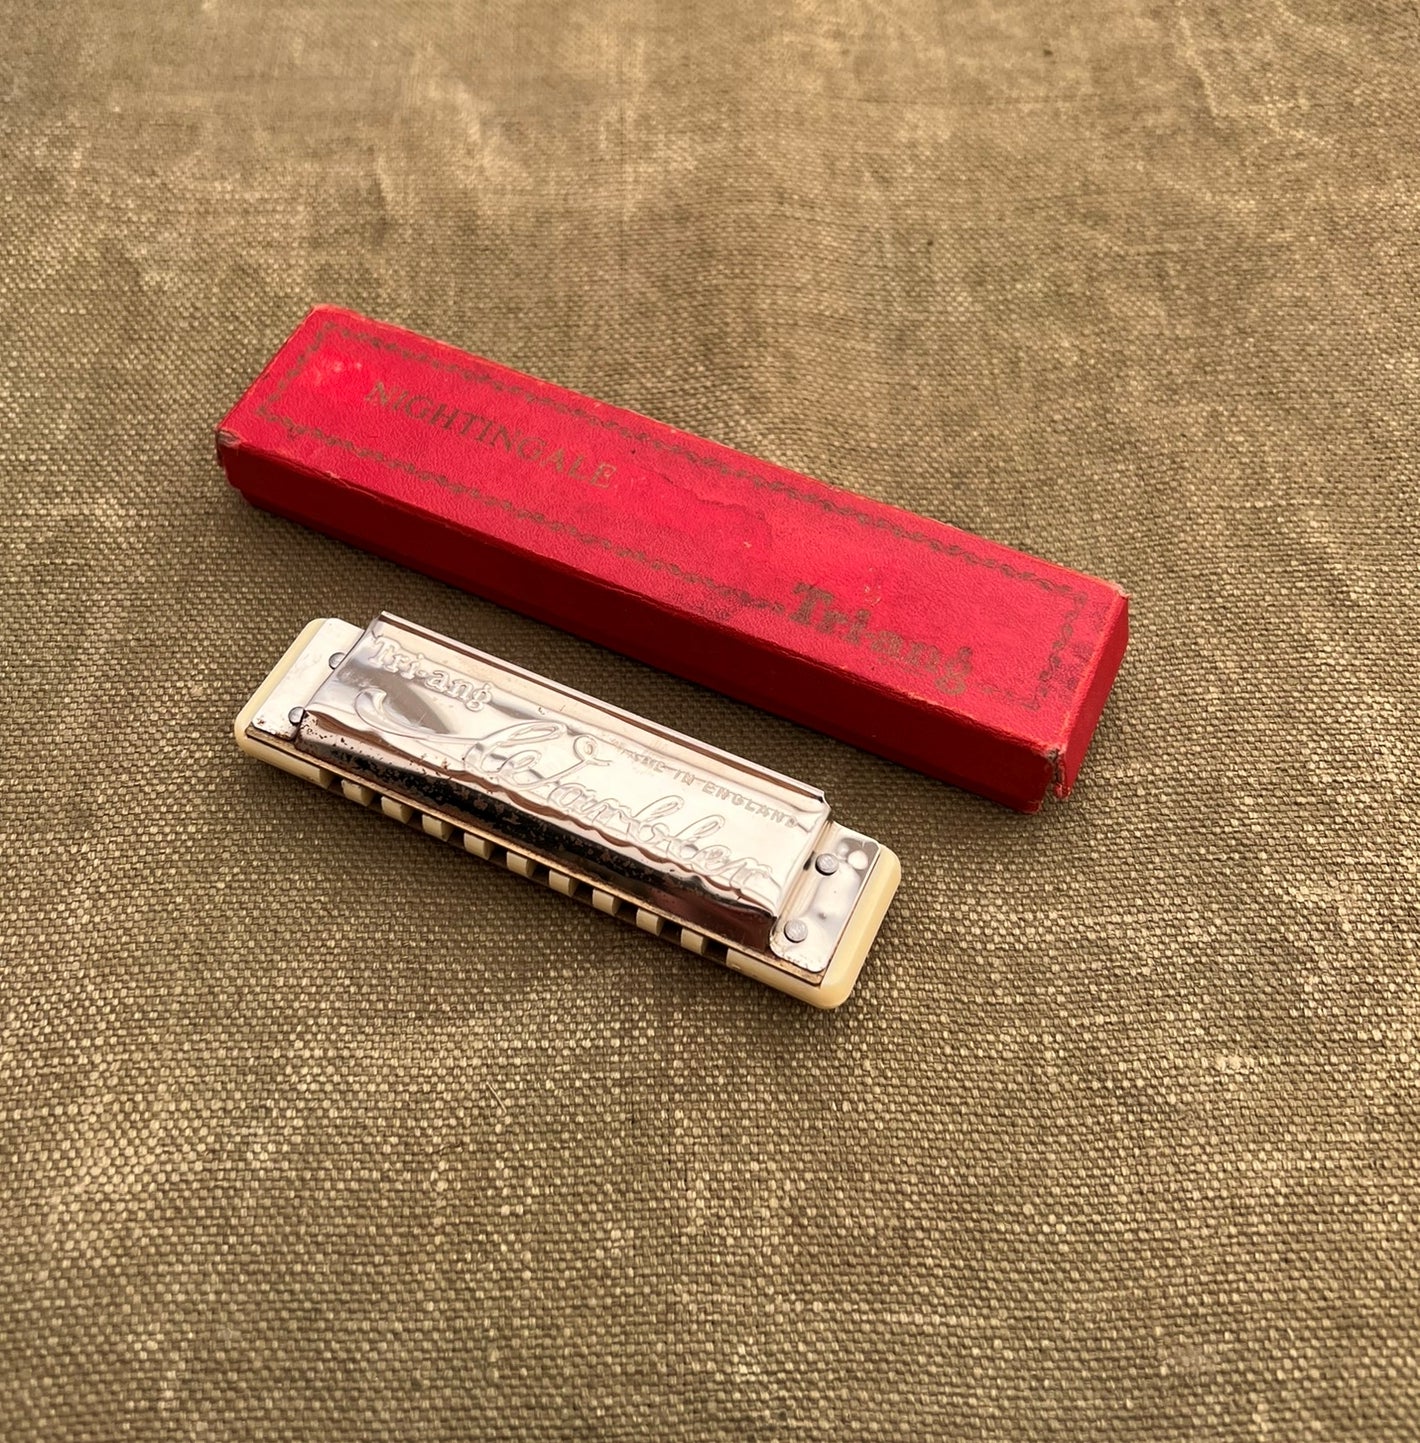 Vintage Rare Tri-ang Nightingale Warbler Mouth Organ Harmonica In Box Collectable Toy Triang